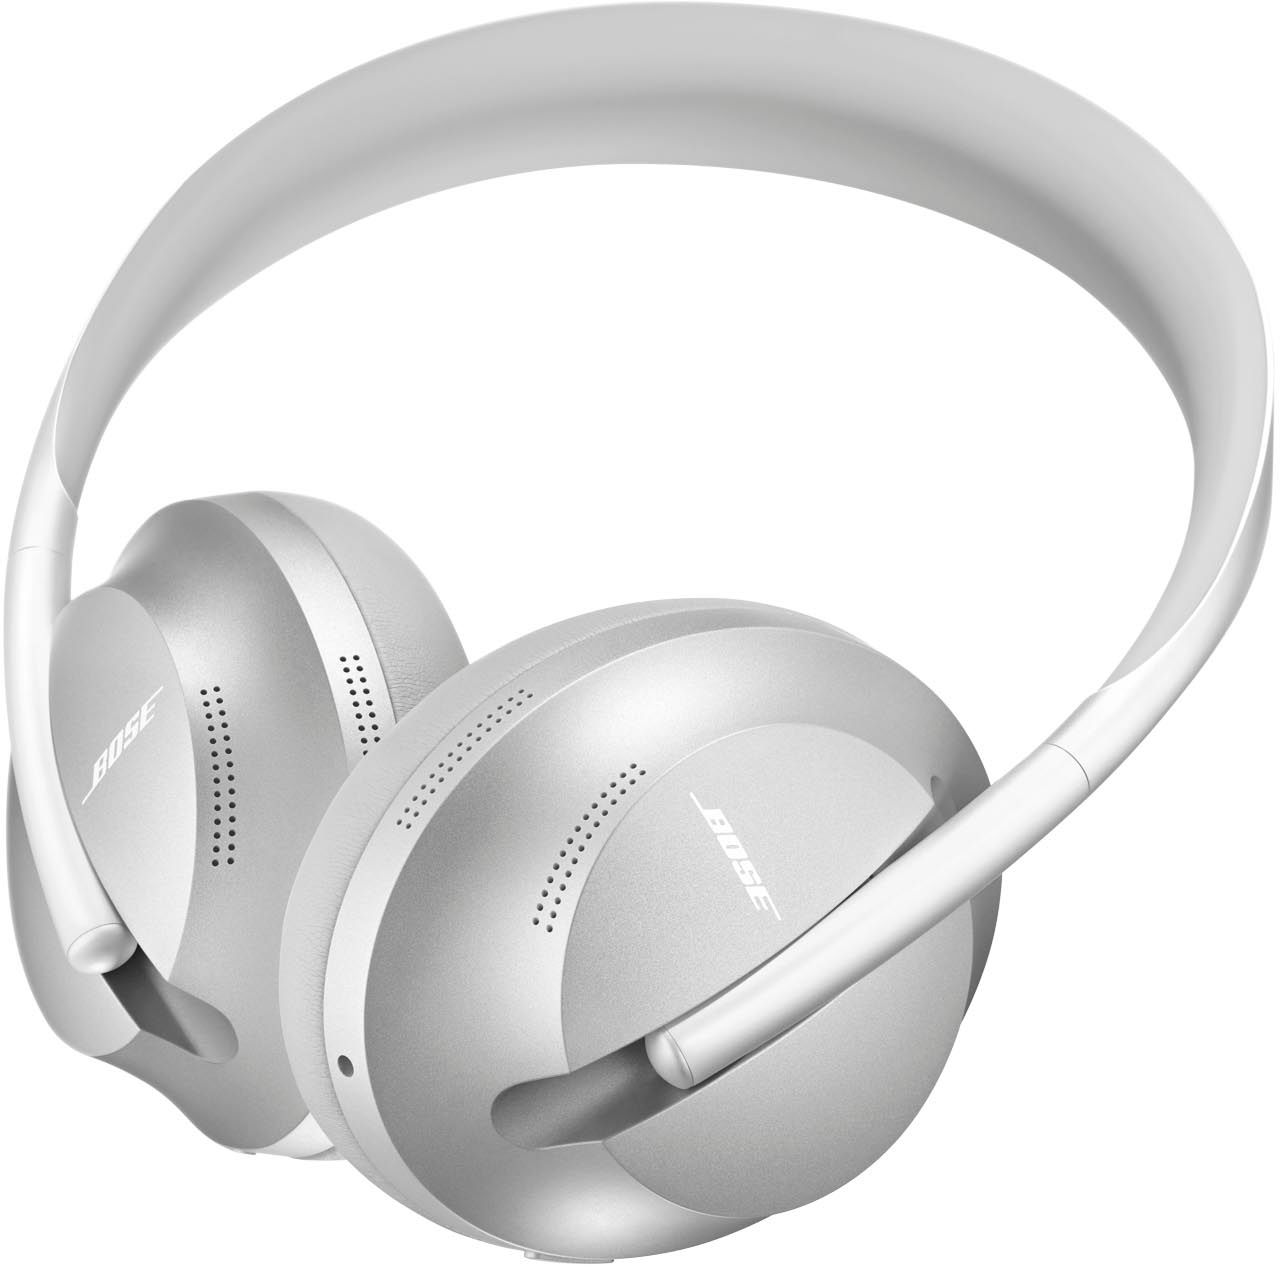 Angle View: Bose - QuietComfort 35 II Wireless Noise Cancelling Over-the-Ear Headphones - Silver